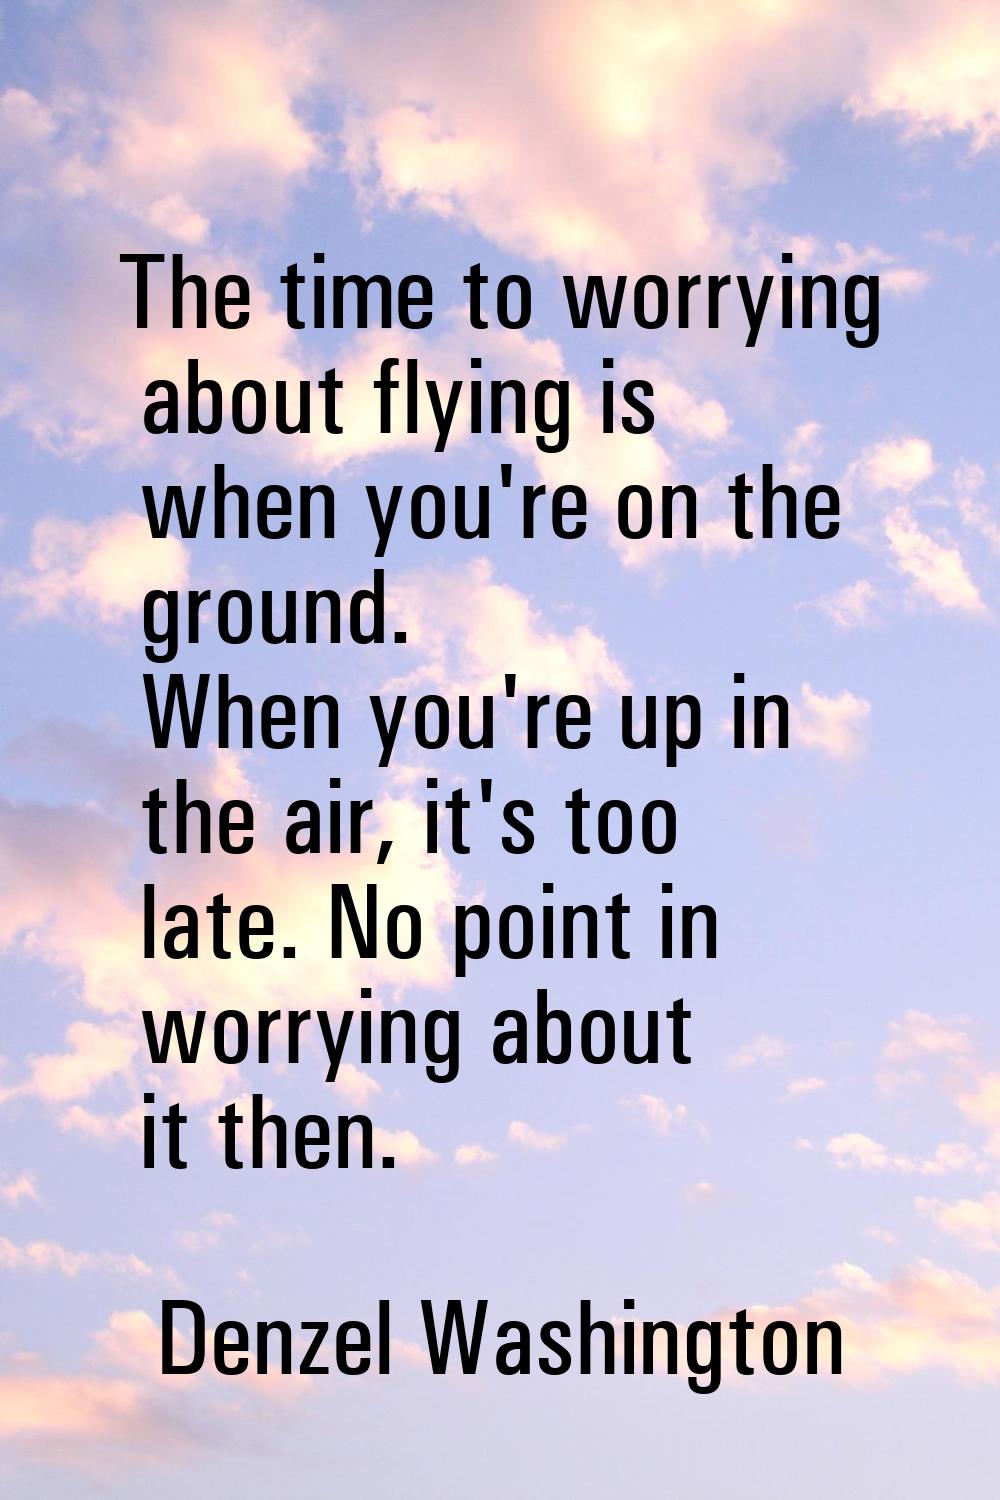 The time to worrying about flying is when you're on the ground. When you're up in the air, it's too